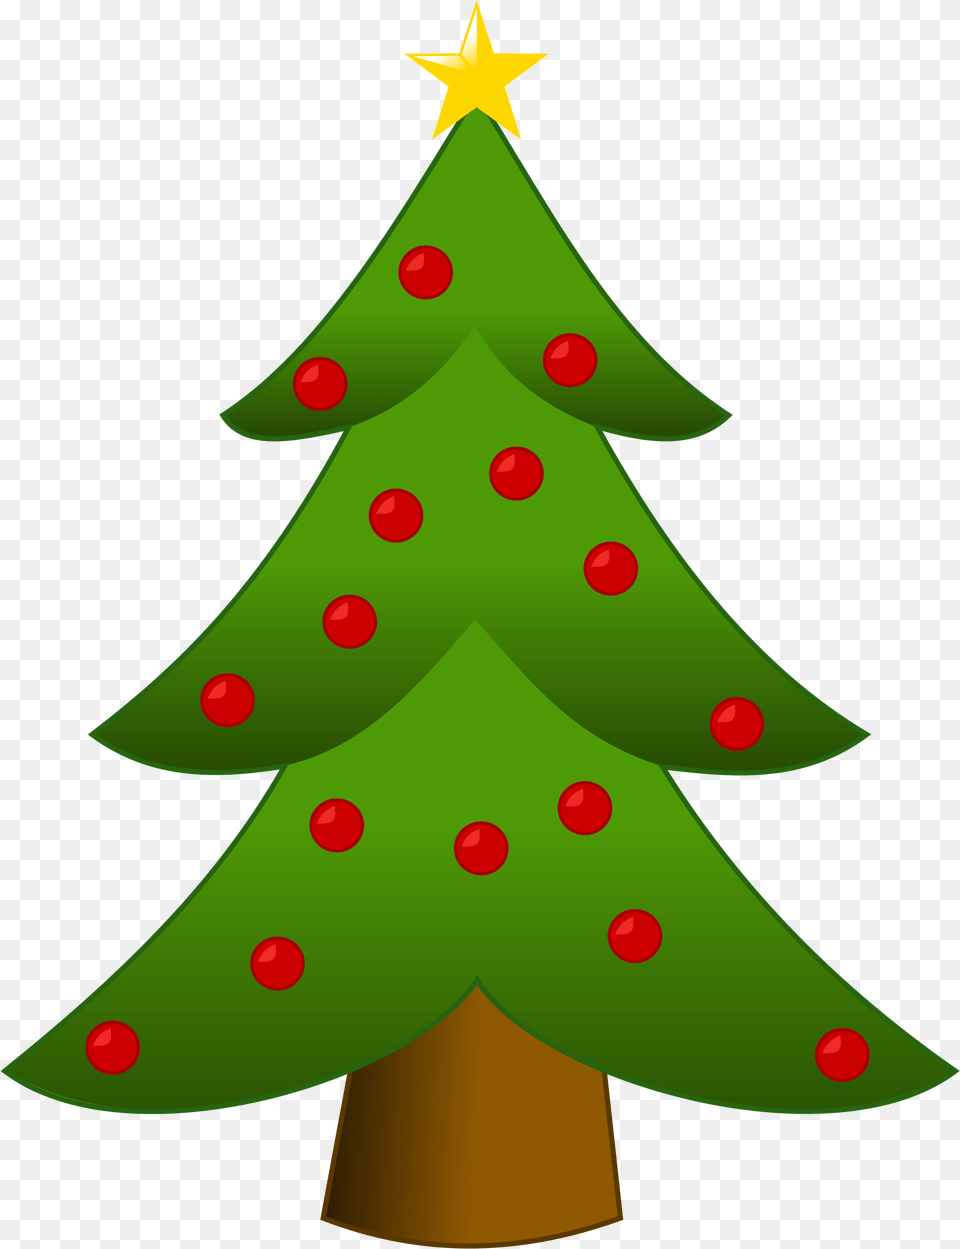 Christmas Tree Clipart 25 Simple Christmas Tree Clipart, Plant, Christmas Decorations, Festival, Shark Png